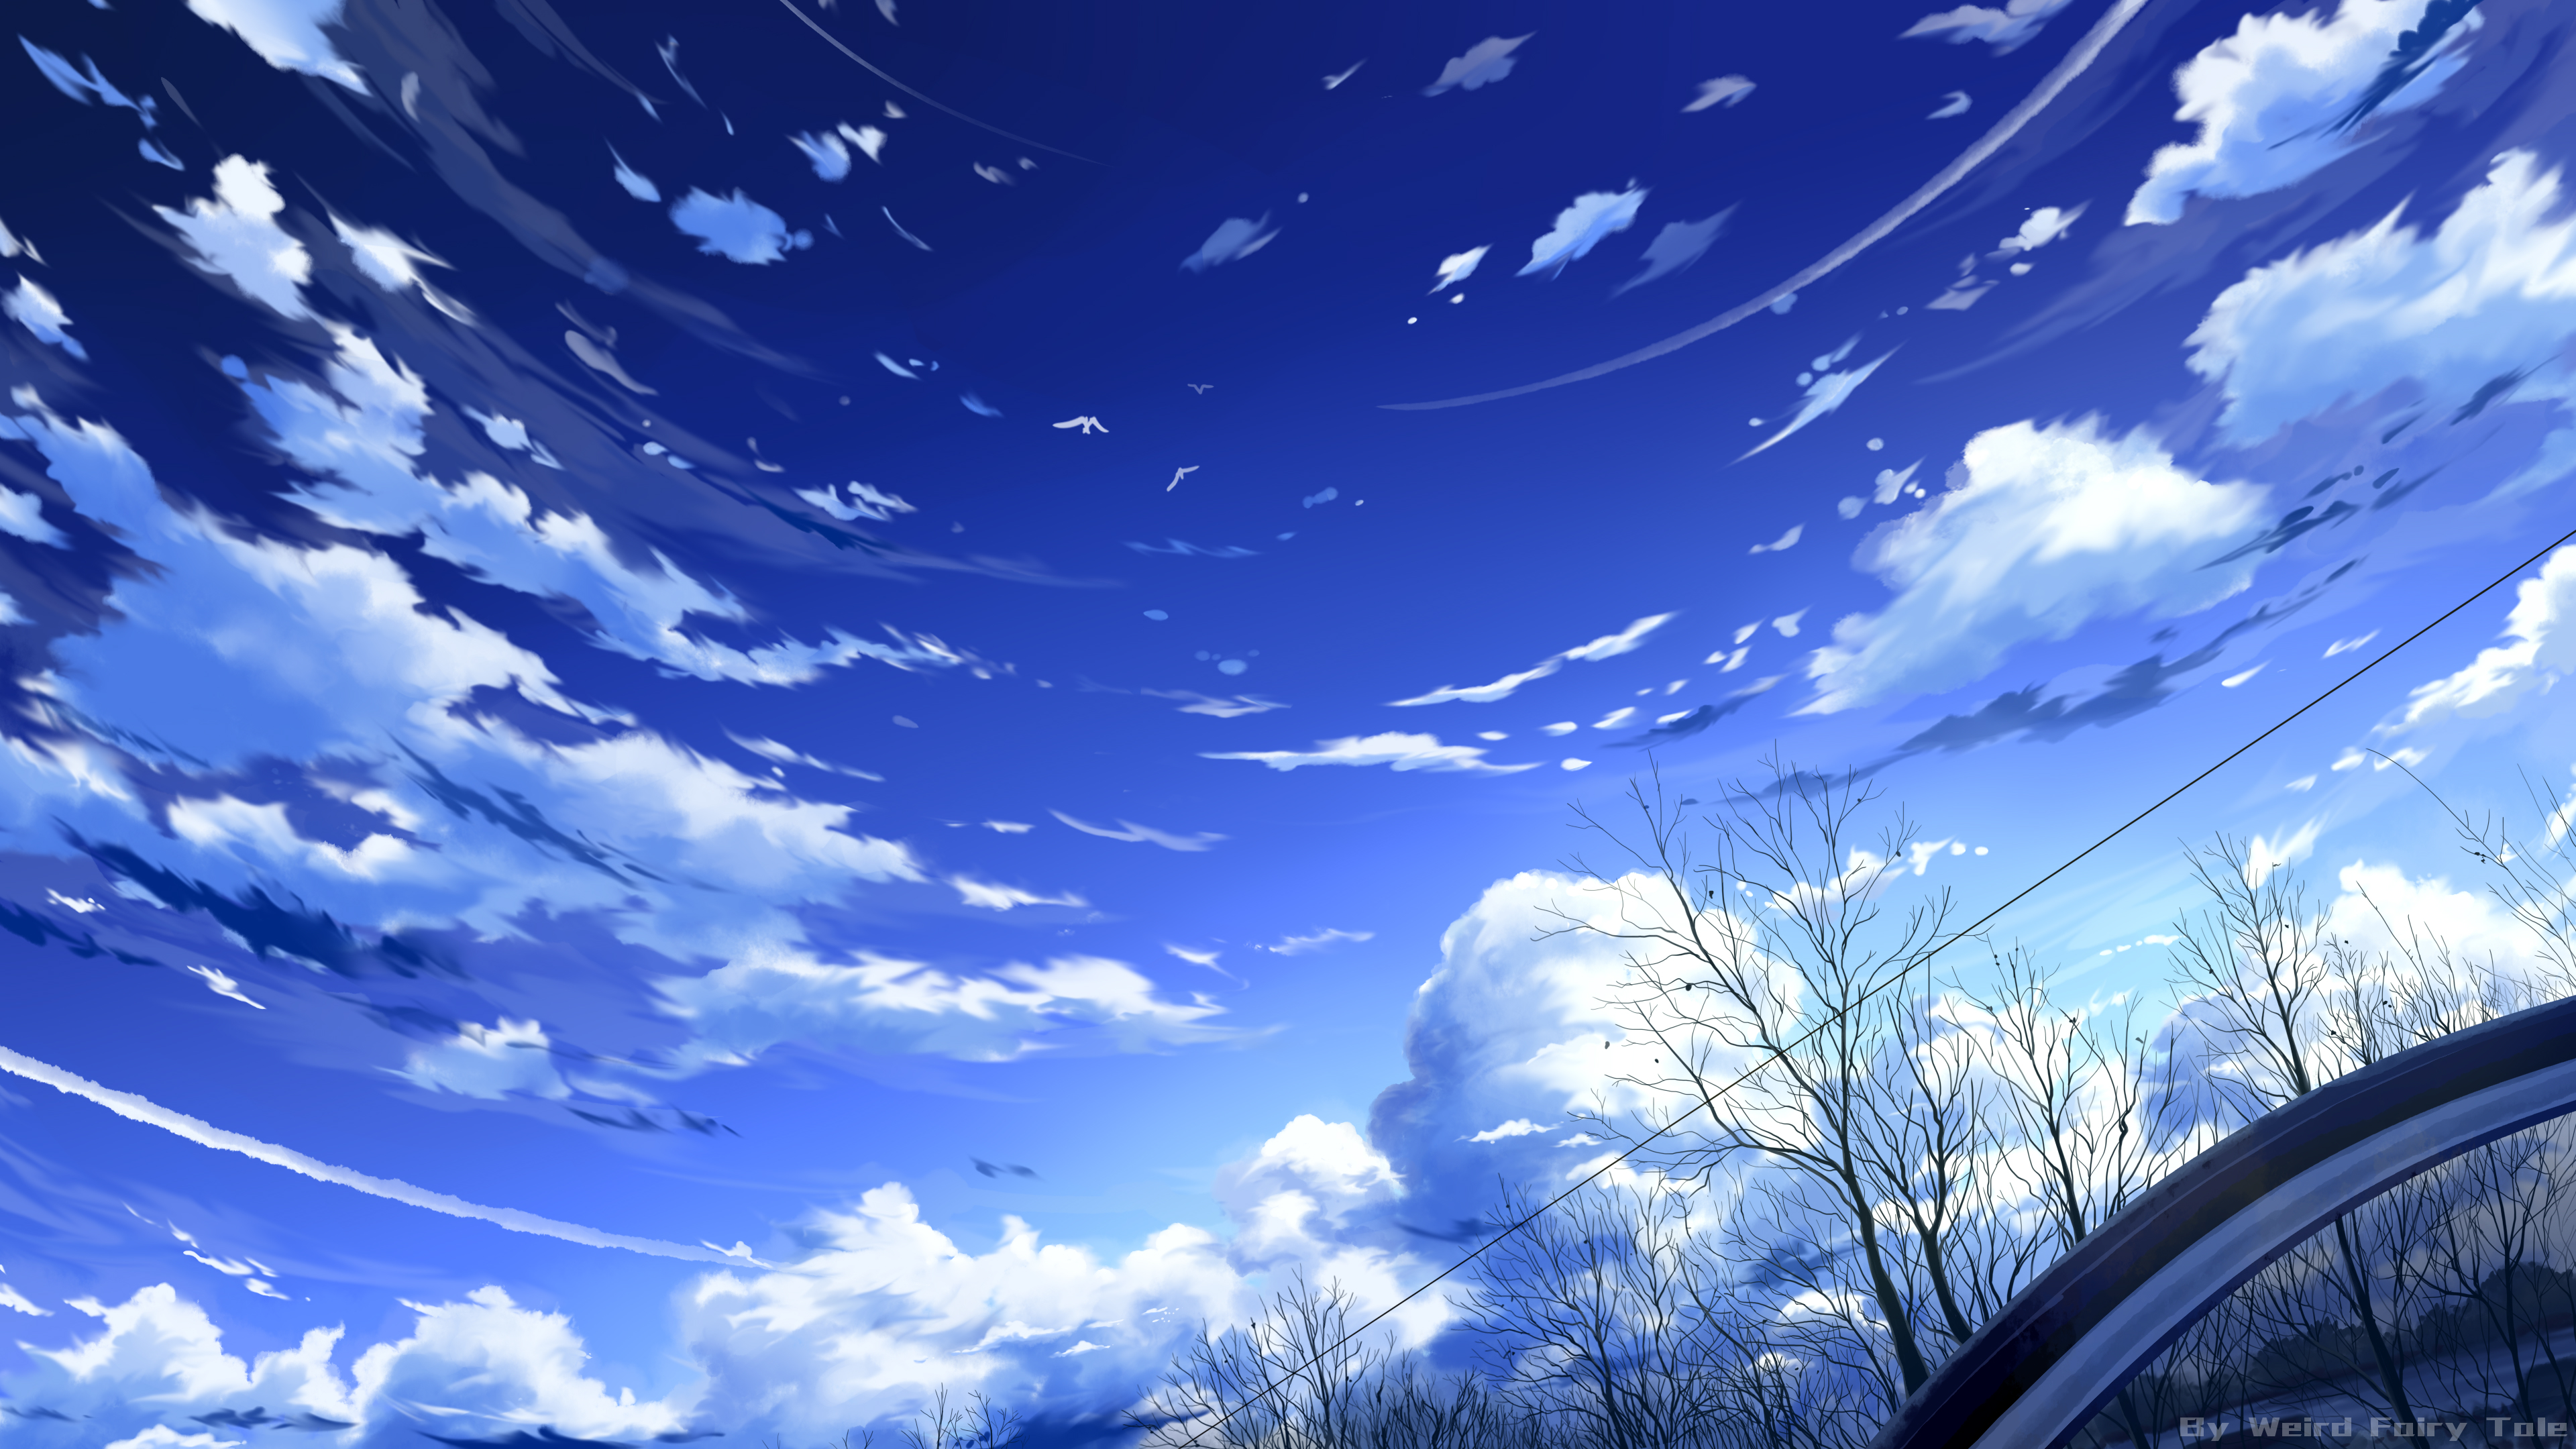 Anime wallpapers for desktop, download free Anime pictures and backgrounds  for PC